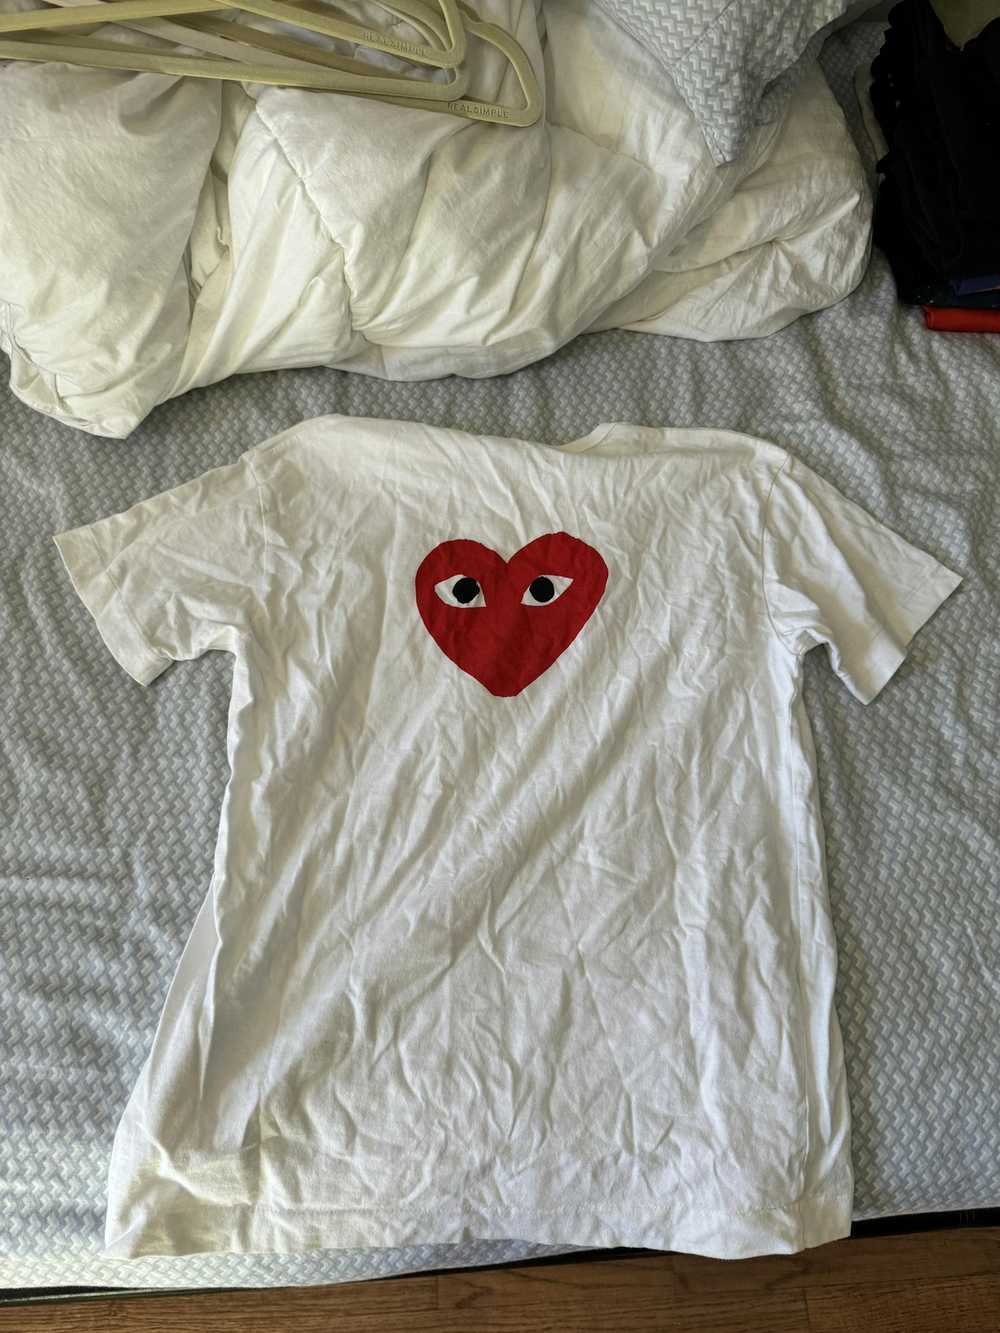 Comme des Garcons CDG Heart White Tee - image 6